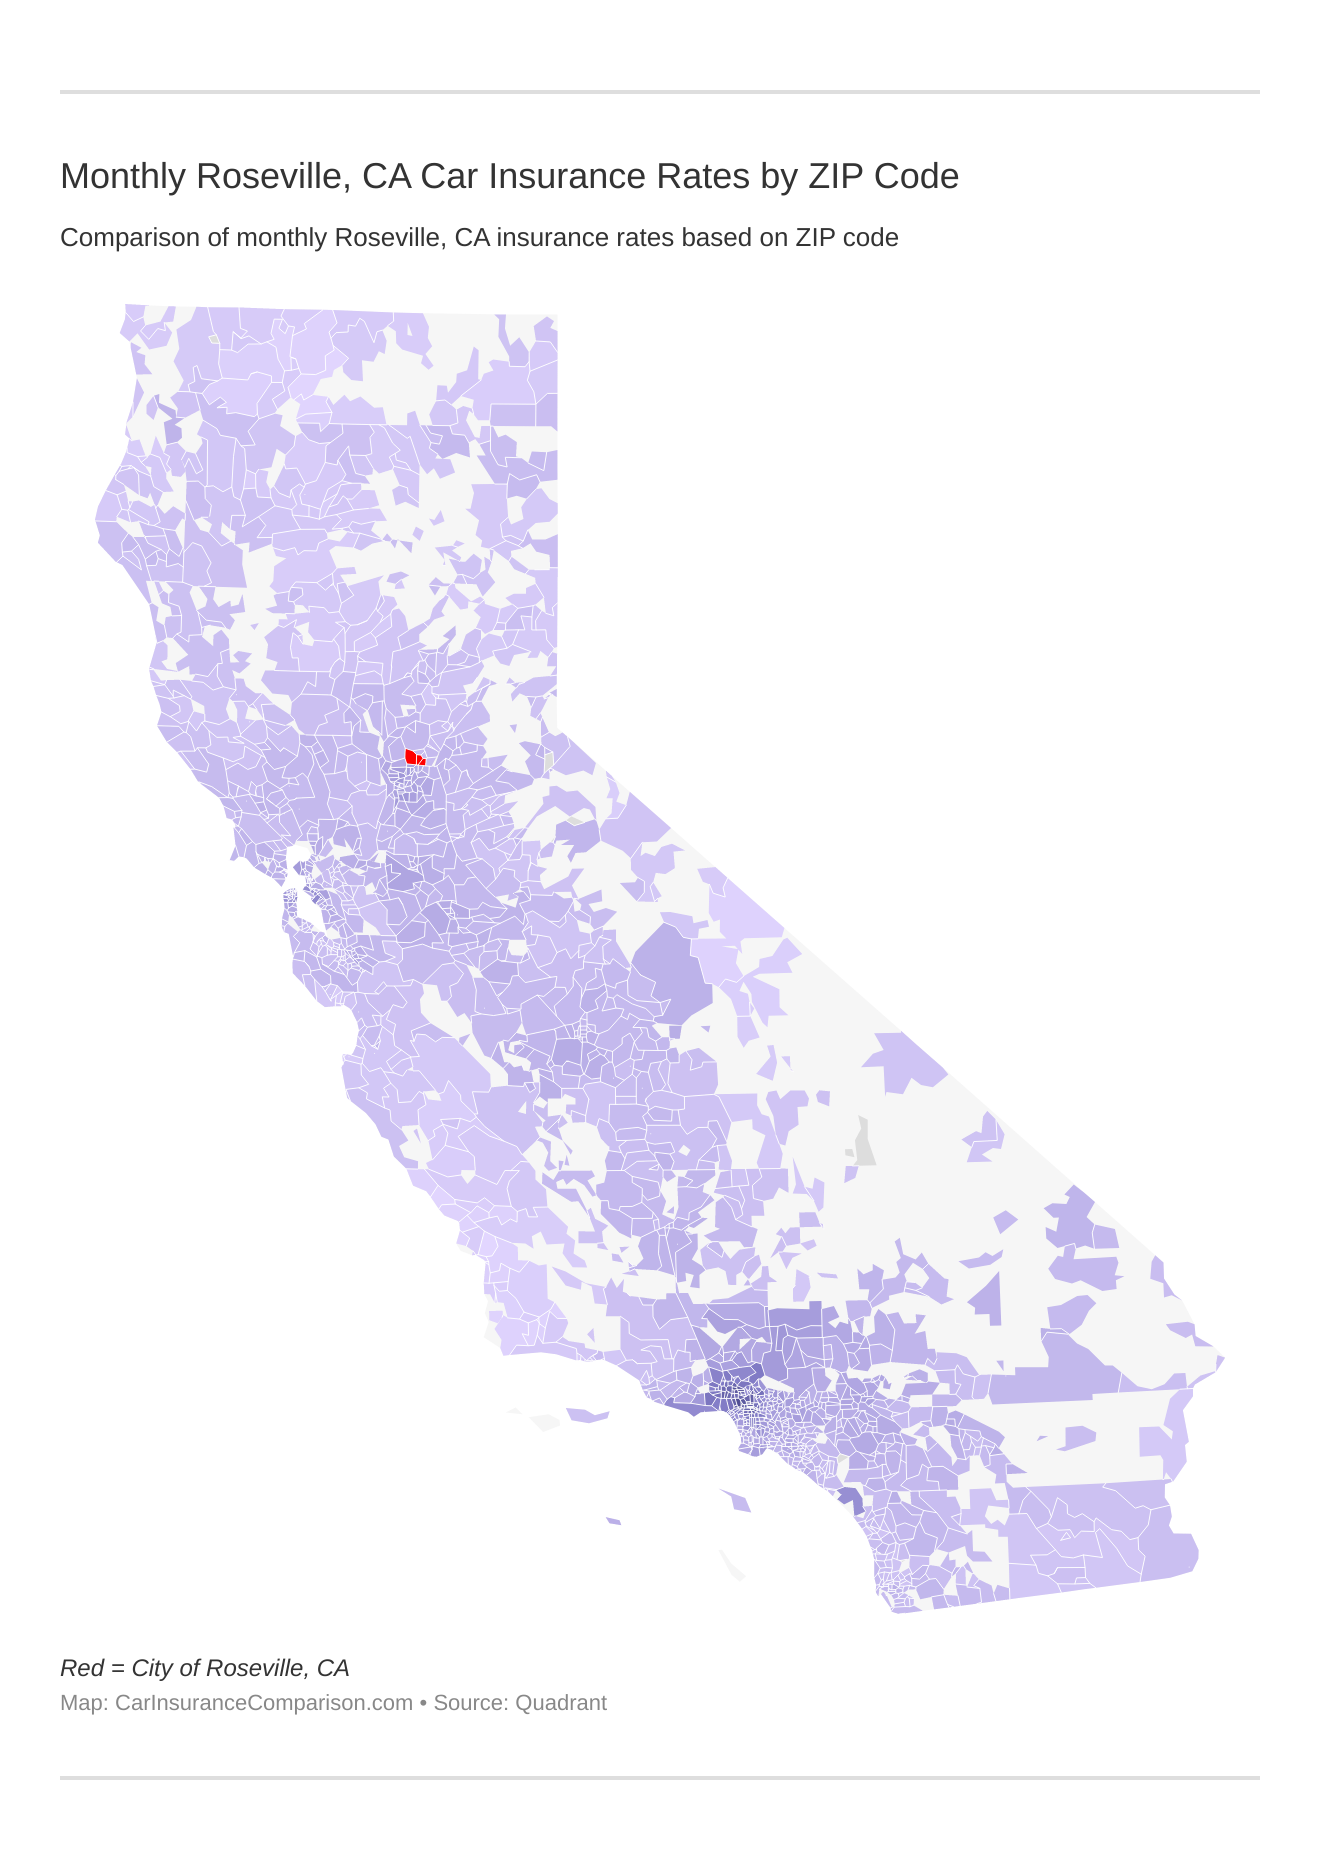 Monthly Roseville, CA Car Insurance Rates by ZIP Code